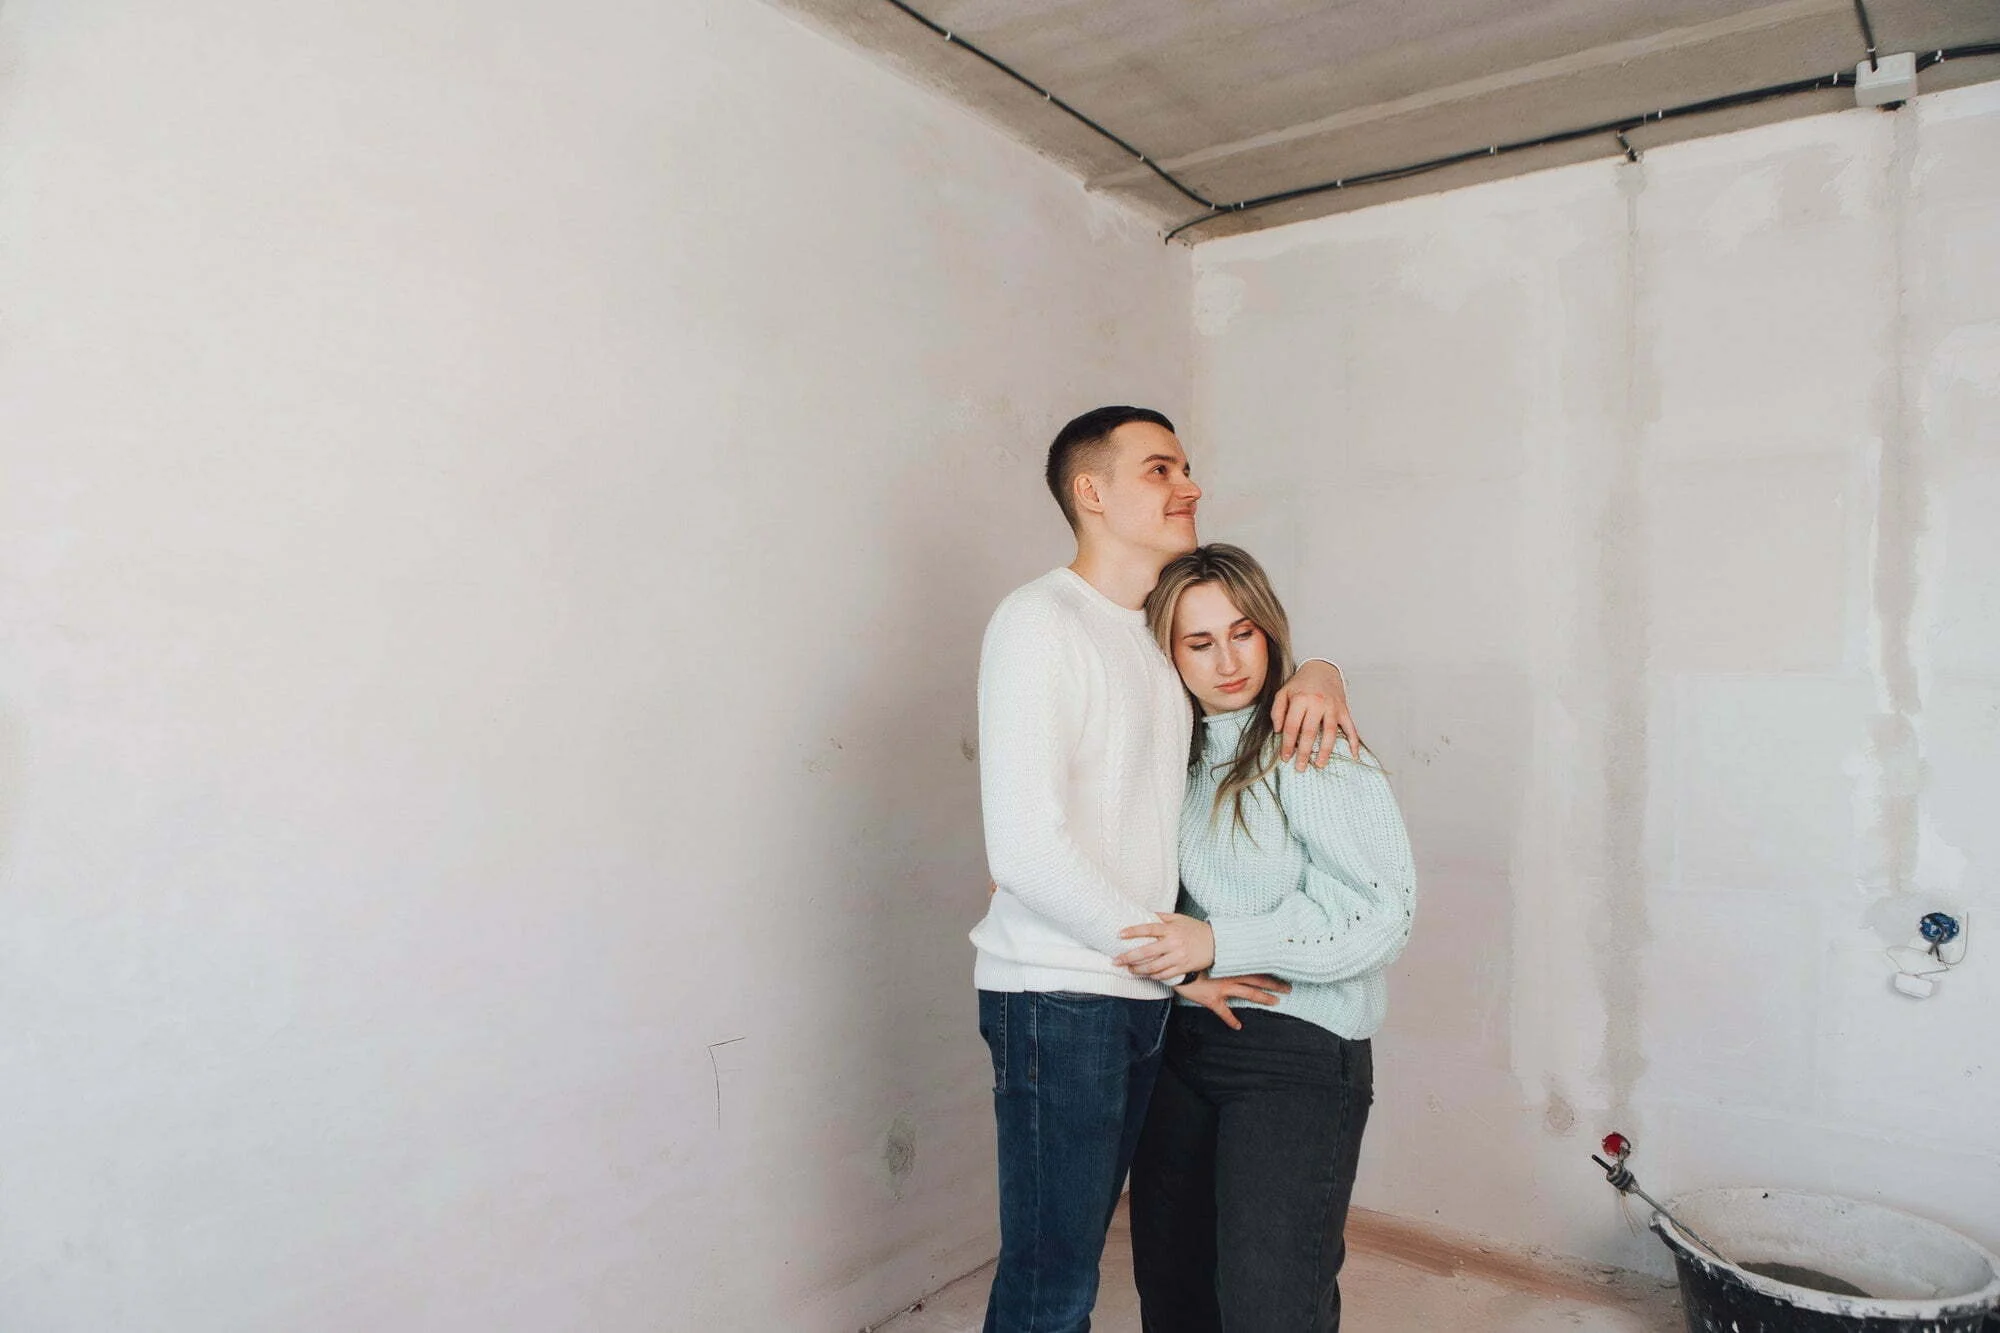 Couple in unfinished building. Woman and men thinking about apartment renovation